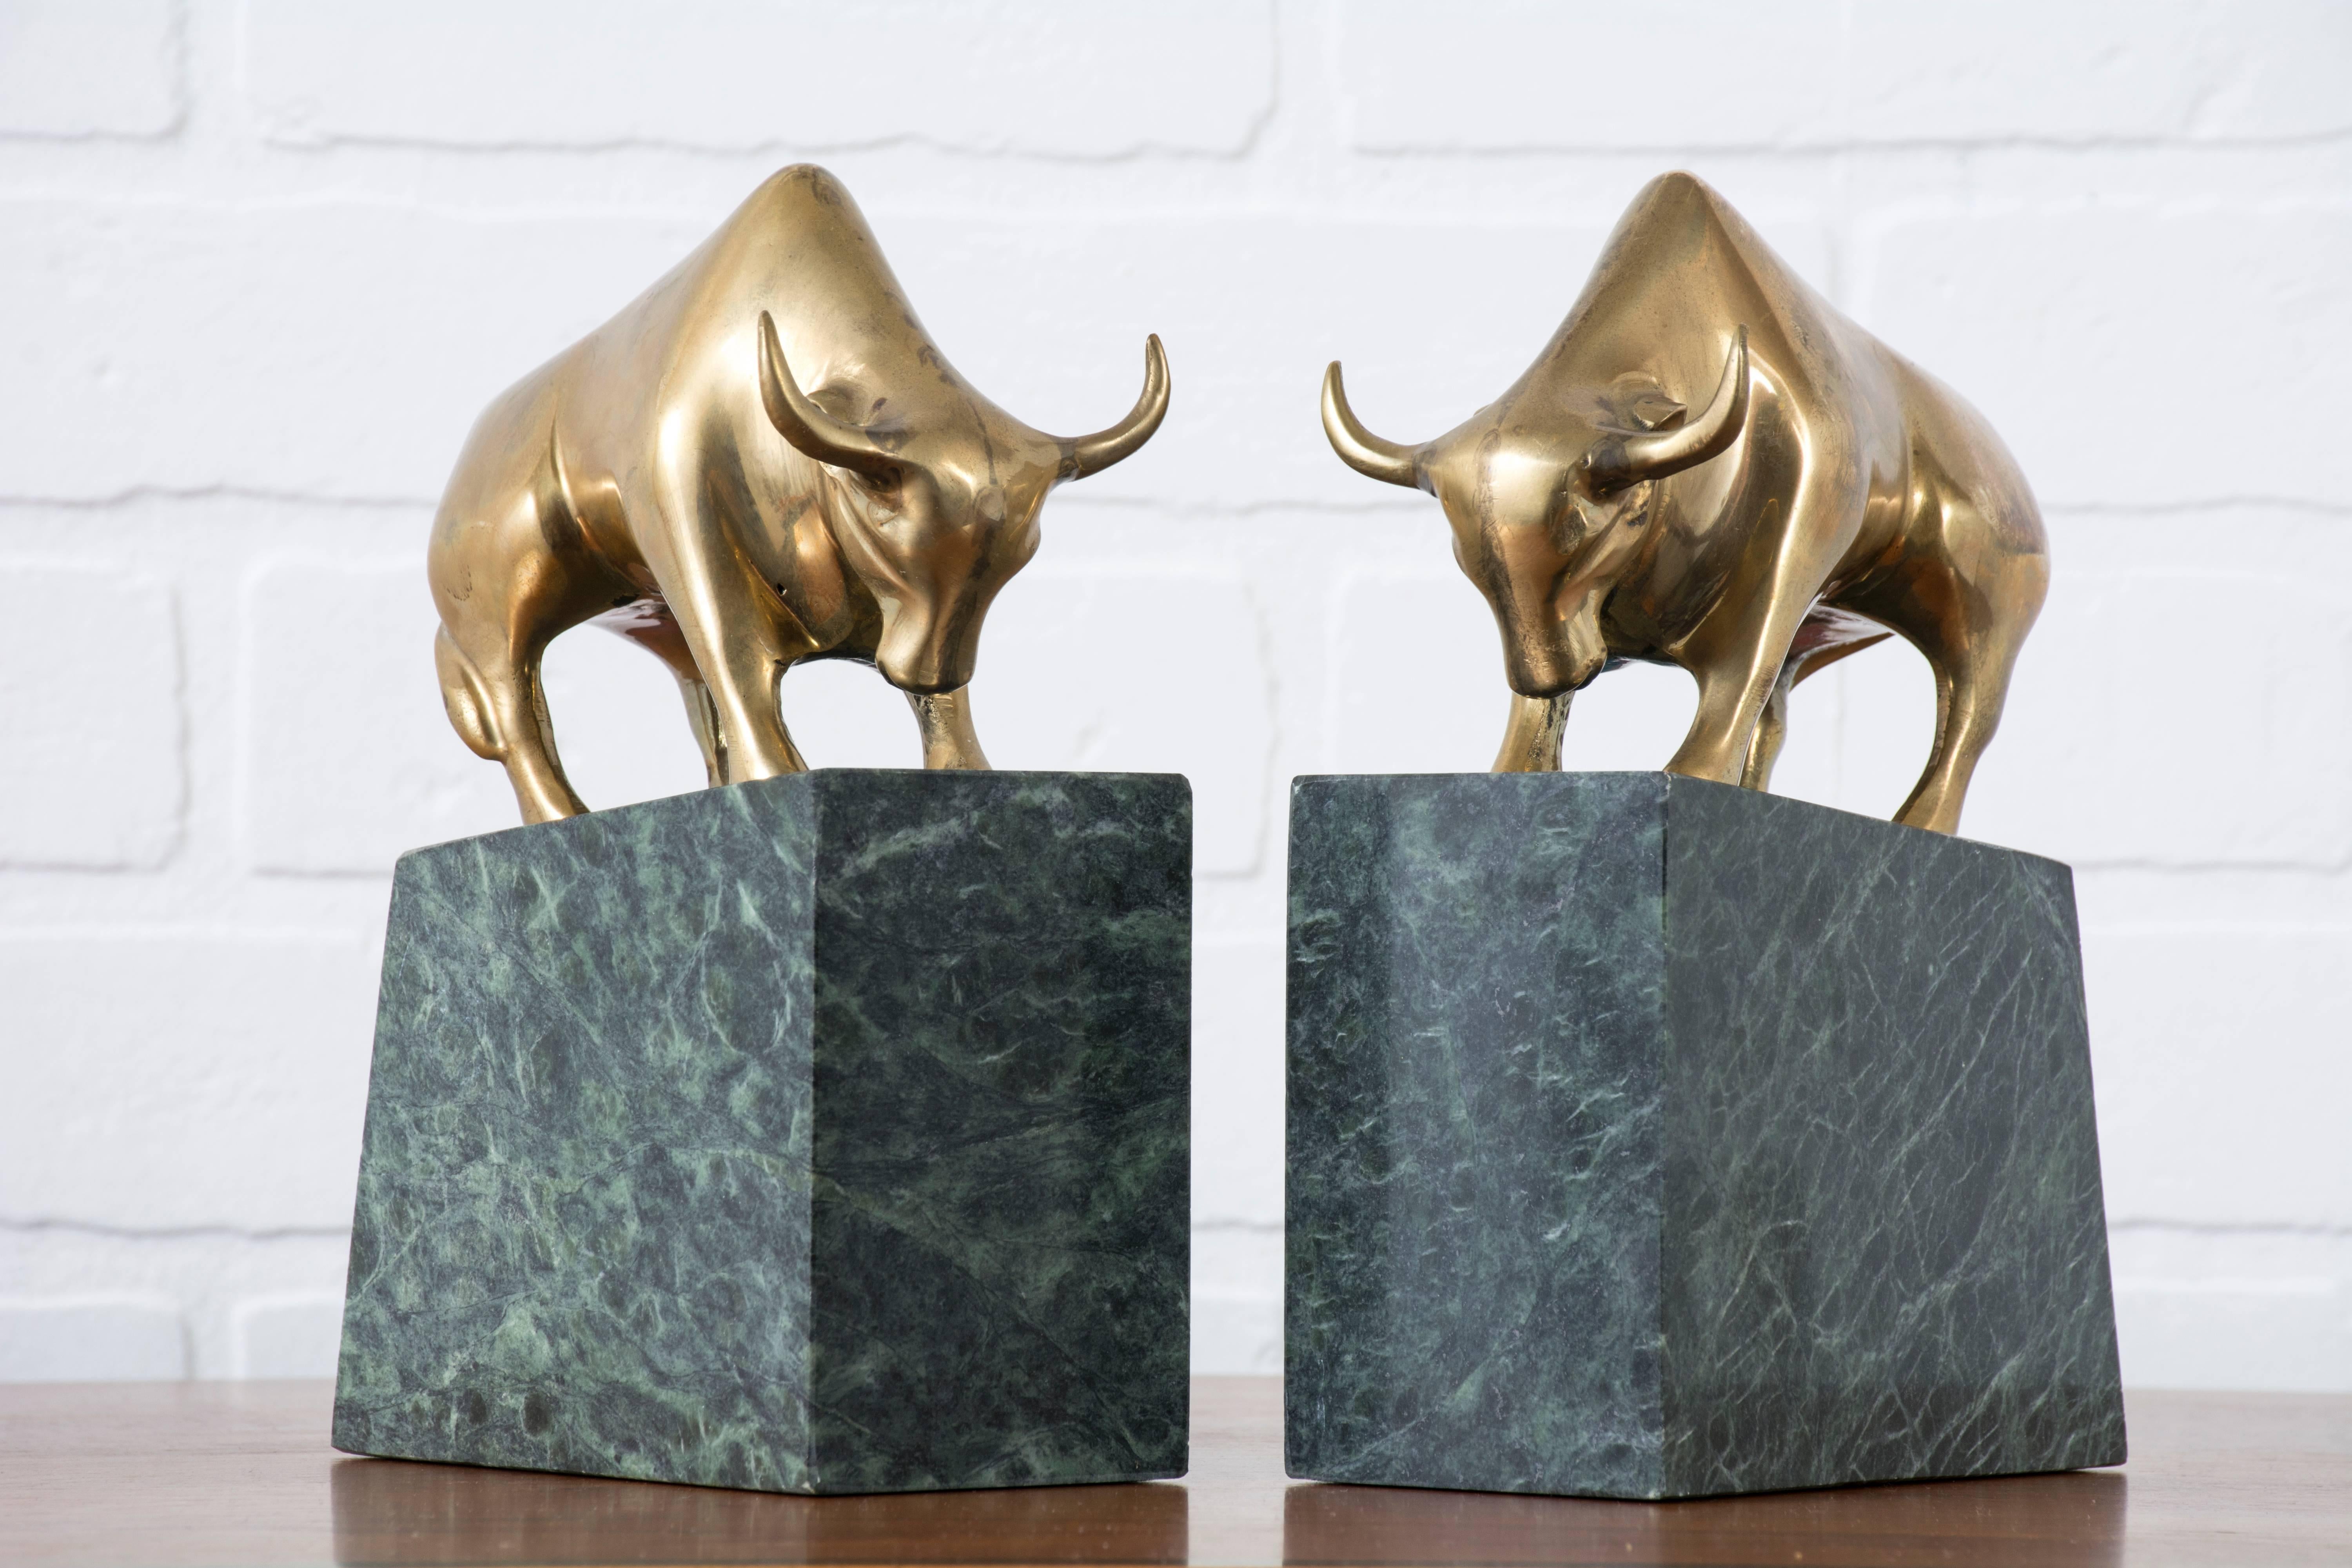 This is a pair of vintage bookends with brass bulls and green marble pedestals.
